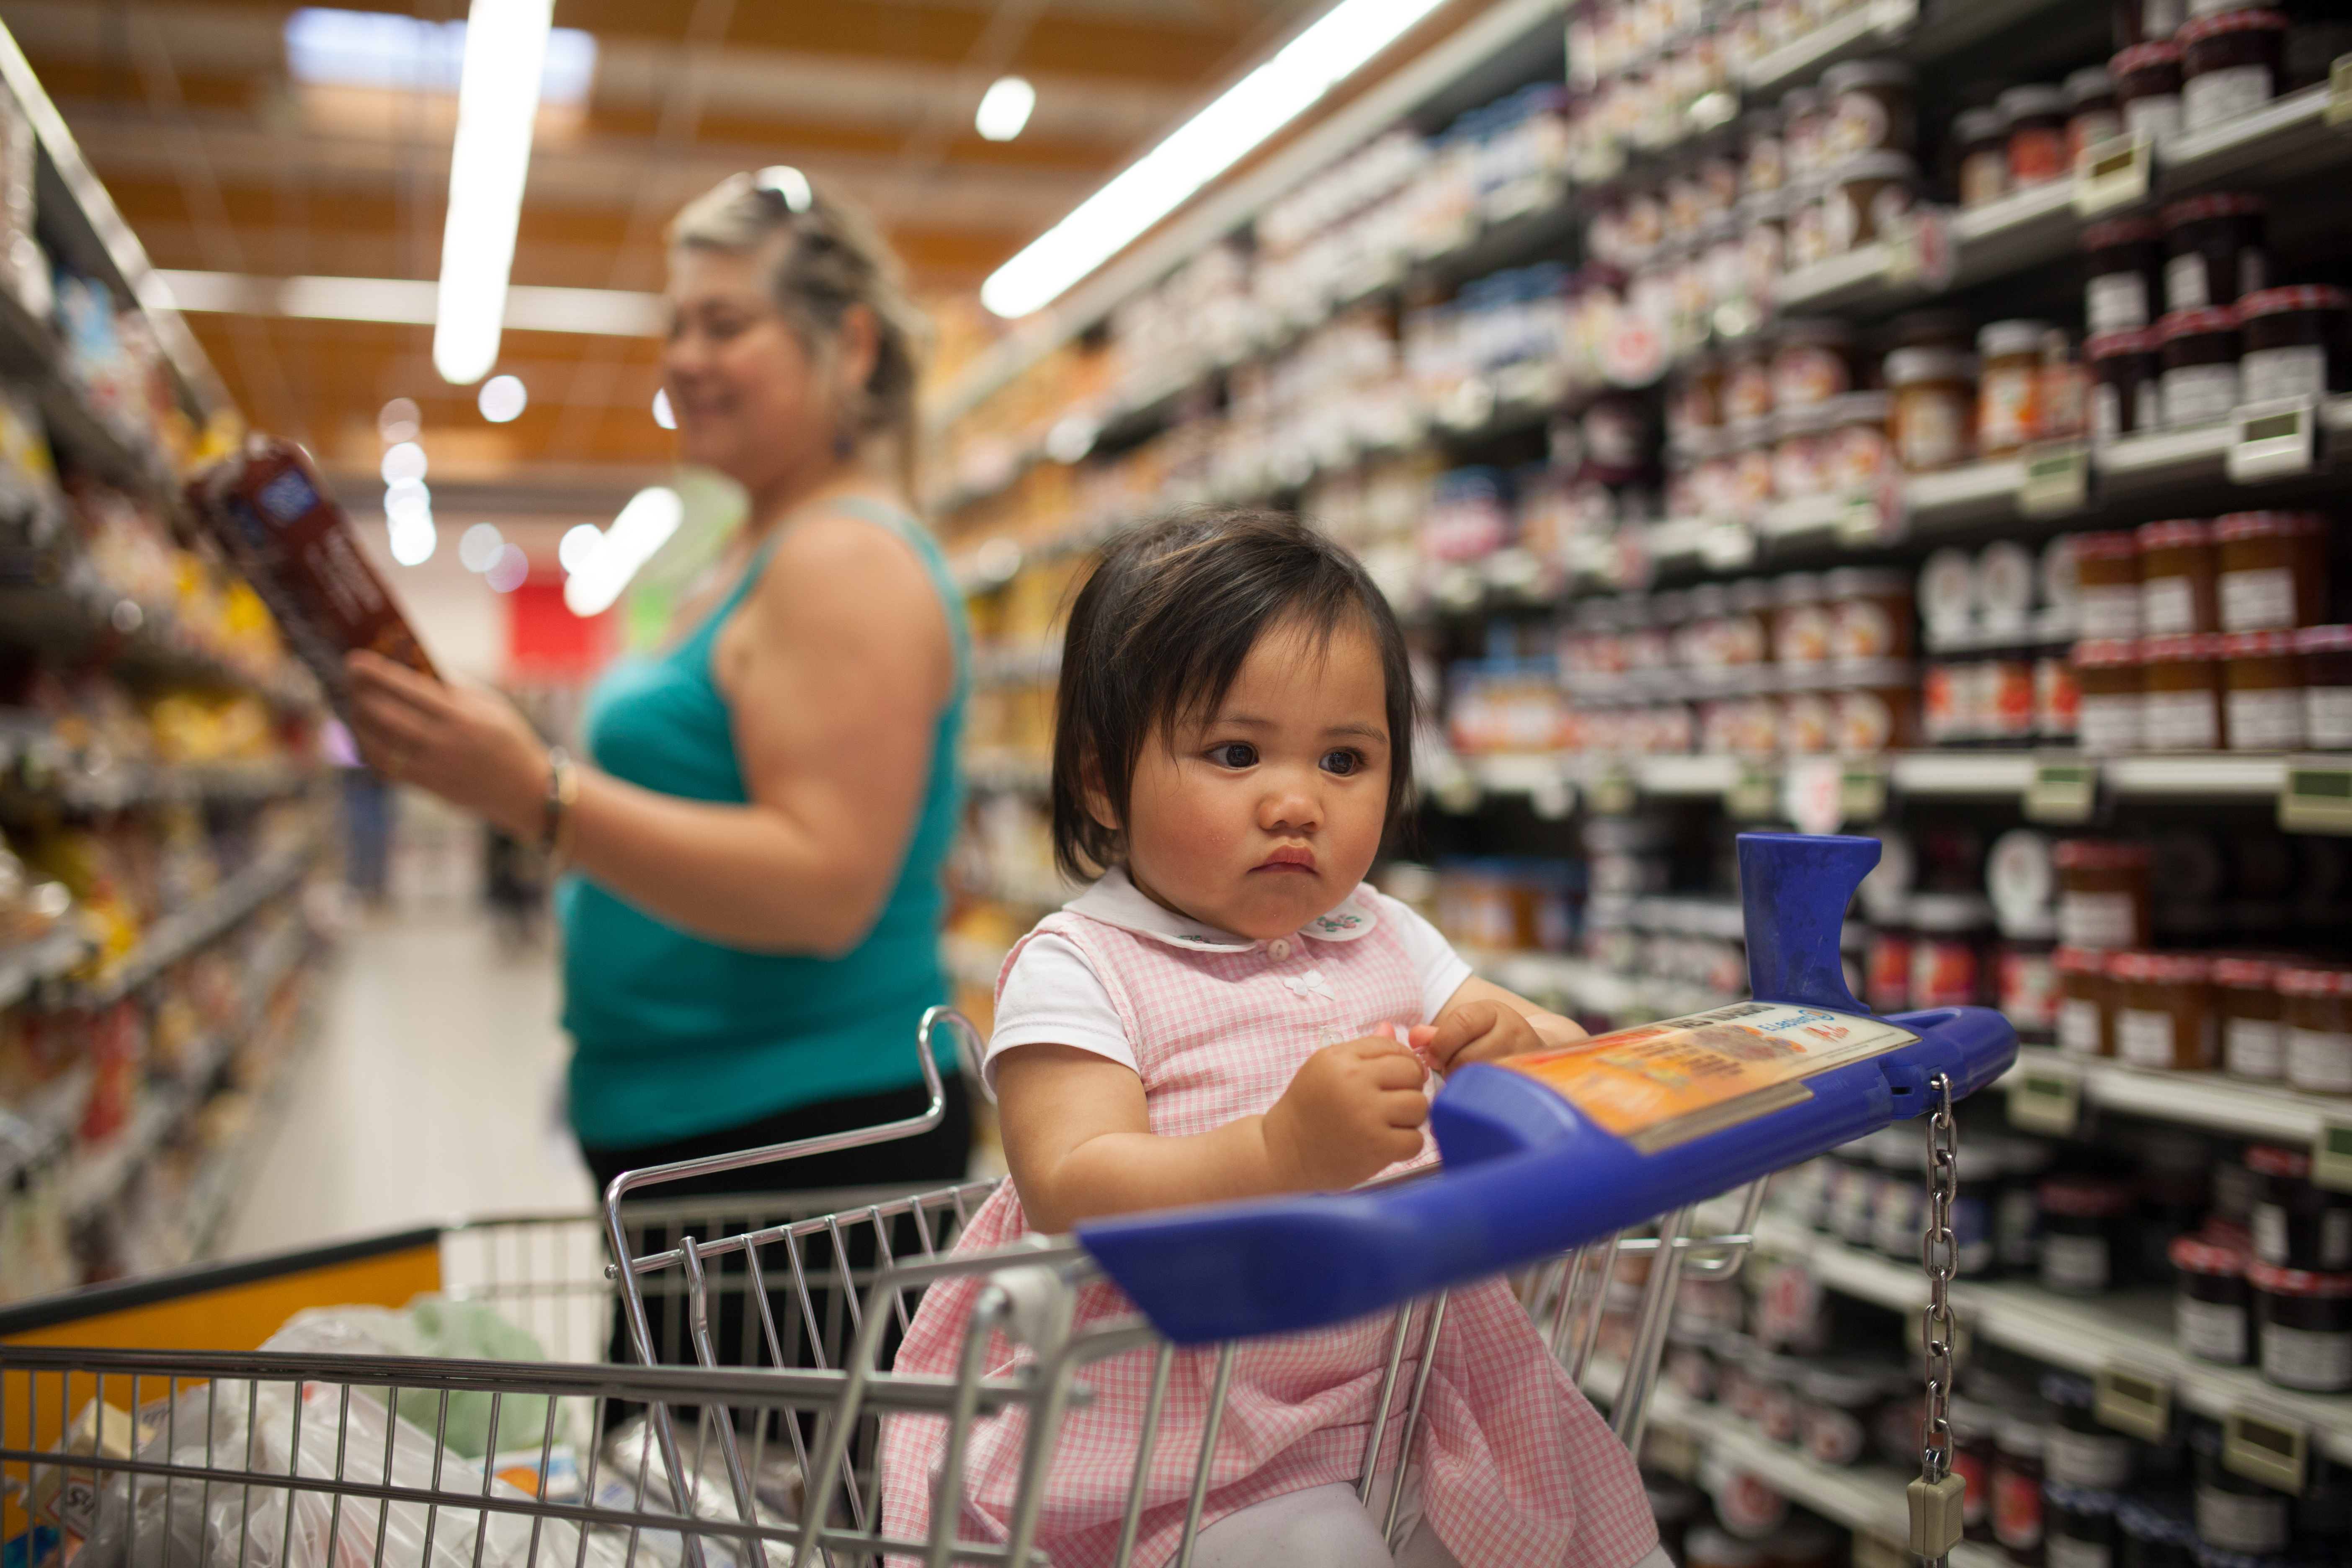 A baby sits in a grocery cart at the supermarket while a woman standing behind the cart examines a product.